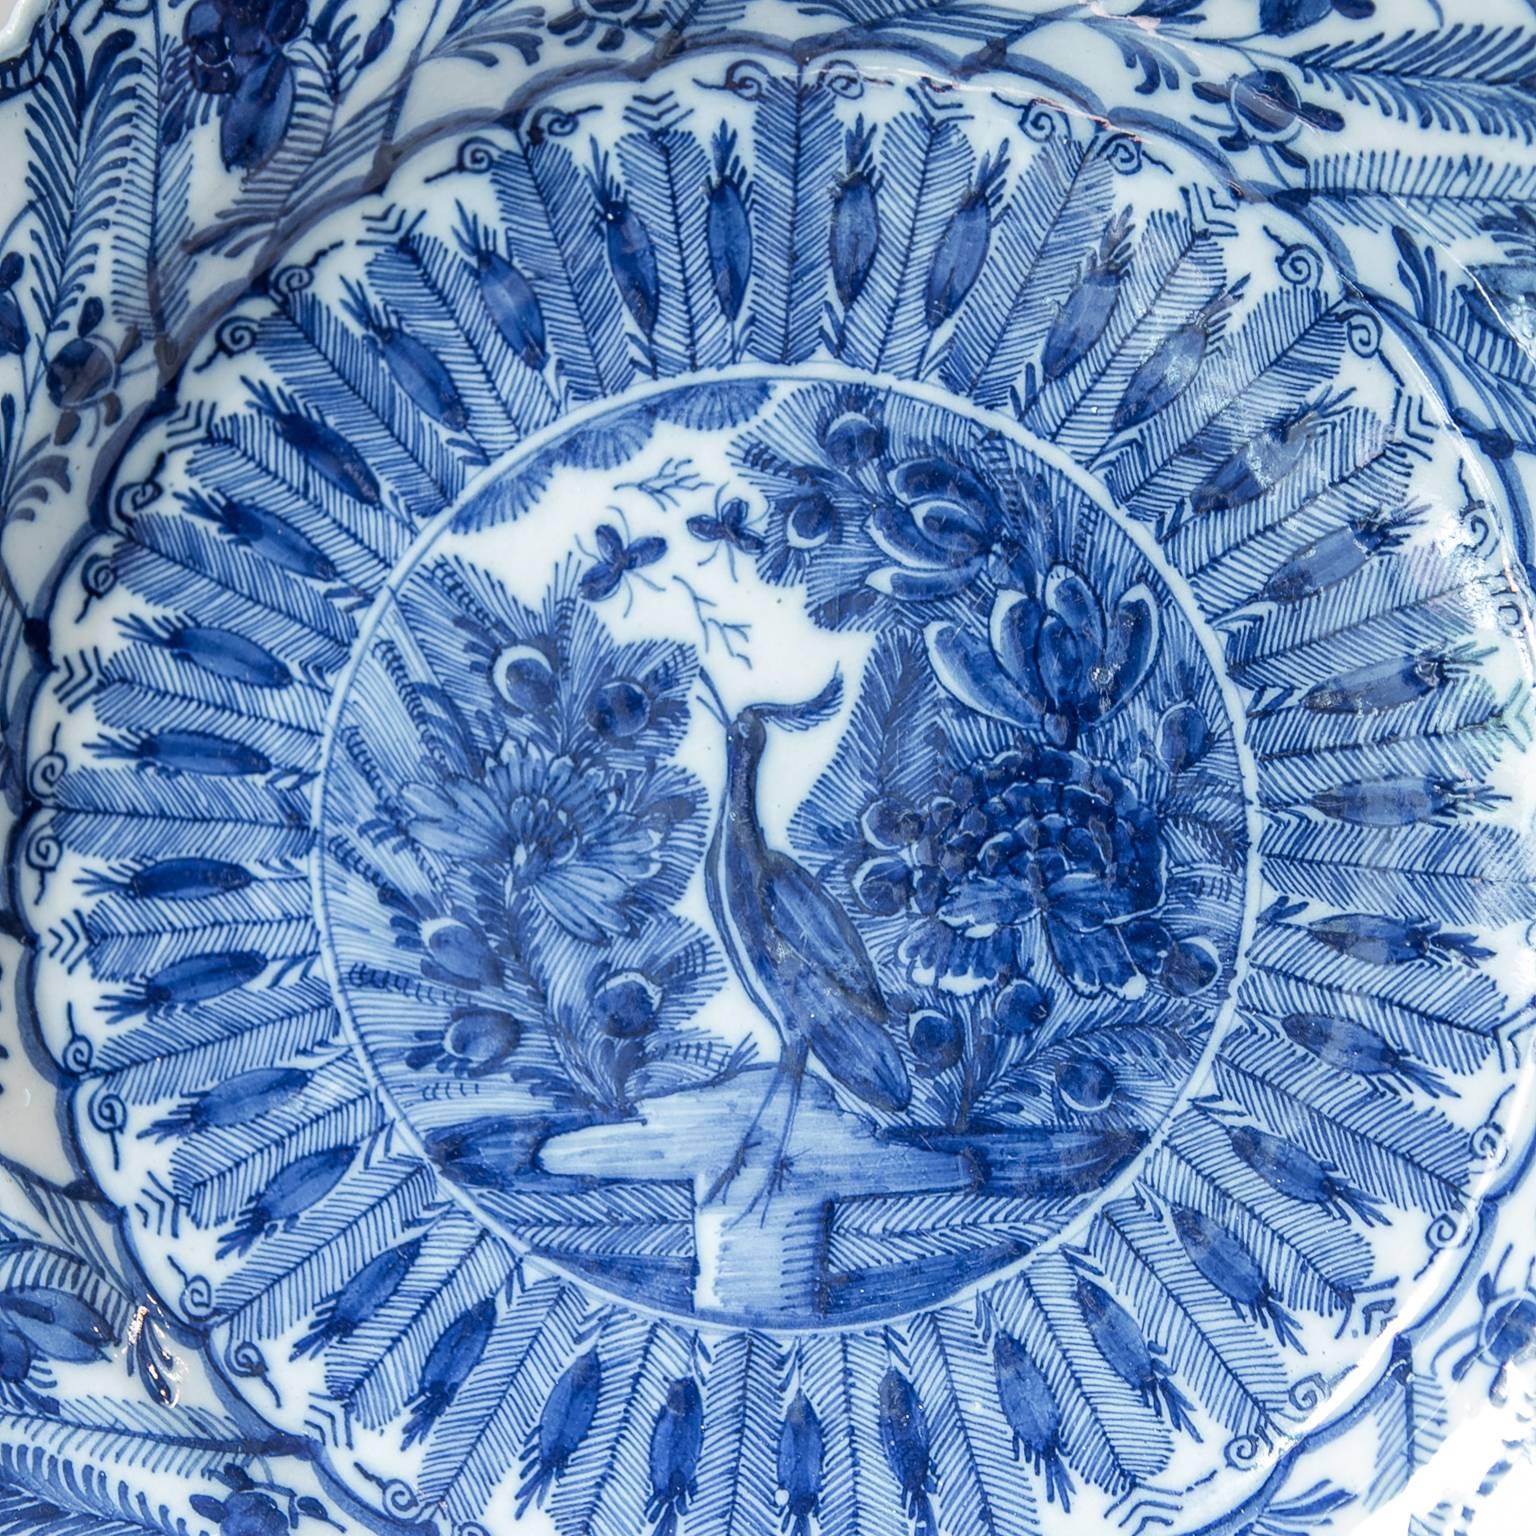 An outstanding pair of Dutch Delft Blue and White chargers made by The Claw factory. The entire surface of the charger is filled with designs inspired by Chinese porcelains from the Wanli period. The central scene shows a crane standing in water